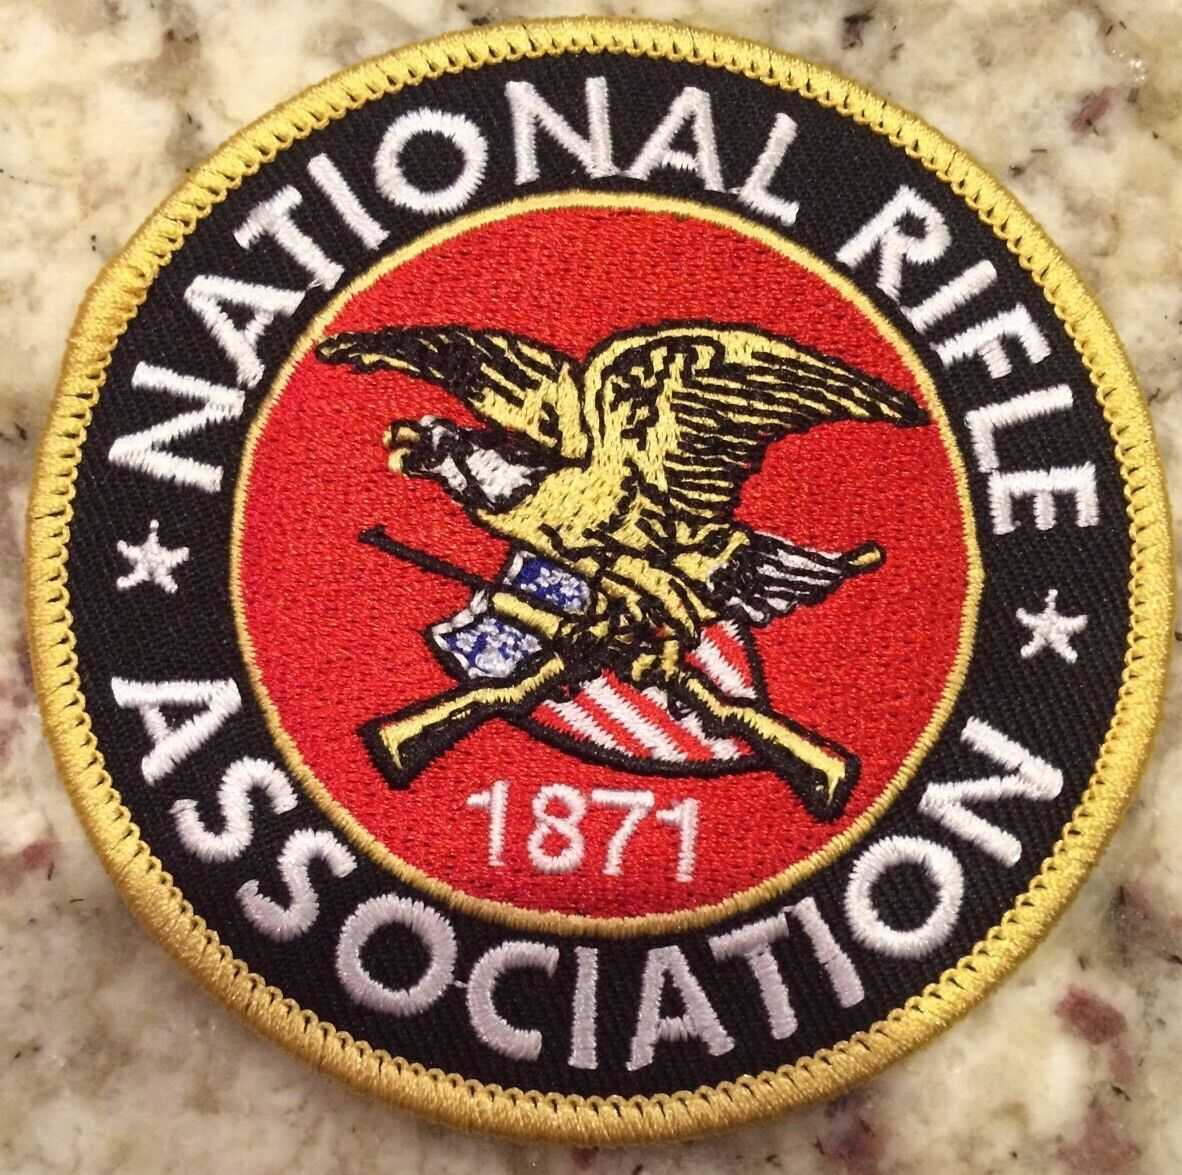 BRAND NEW- NATIONAL RIFLE ASSOC/ NRA EMBROIDERED PATCH 3" Round. Nice!